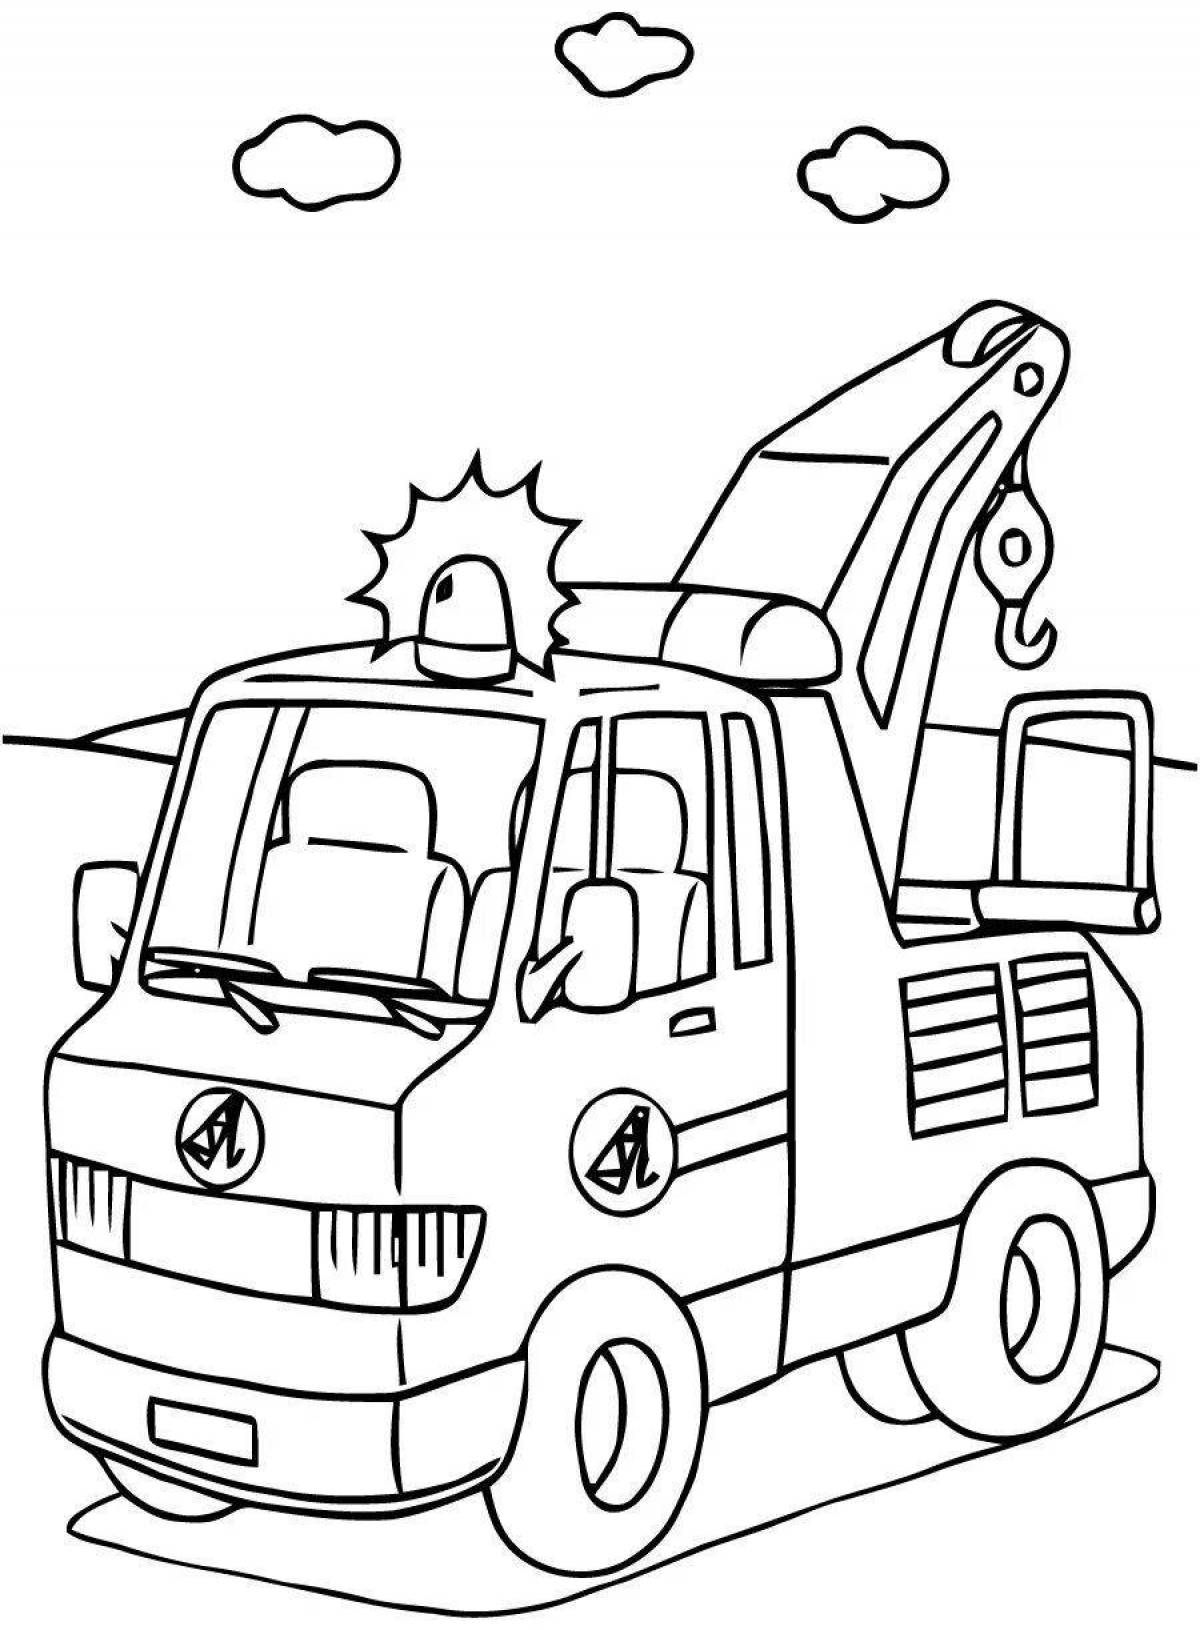 Emergency services shiny coloring page